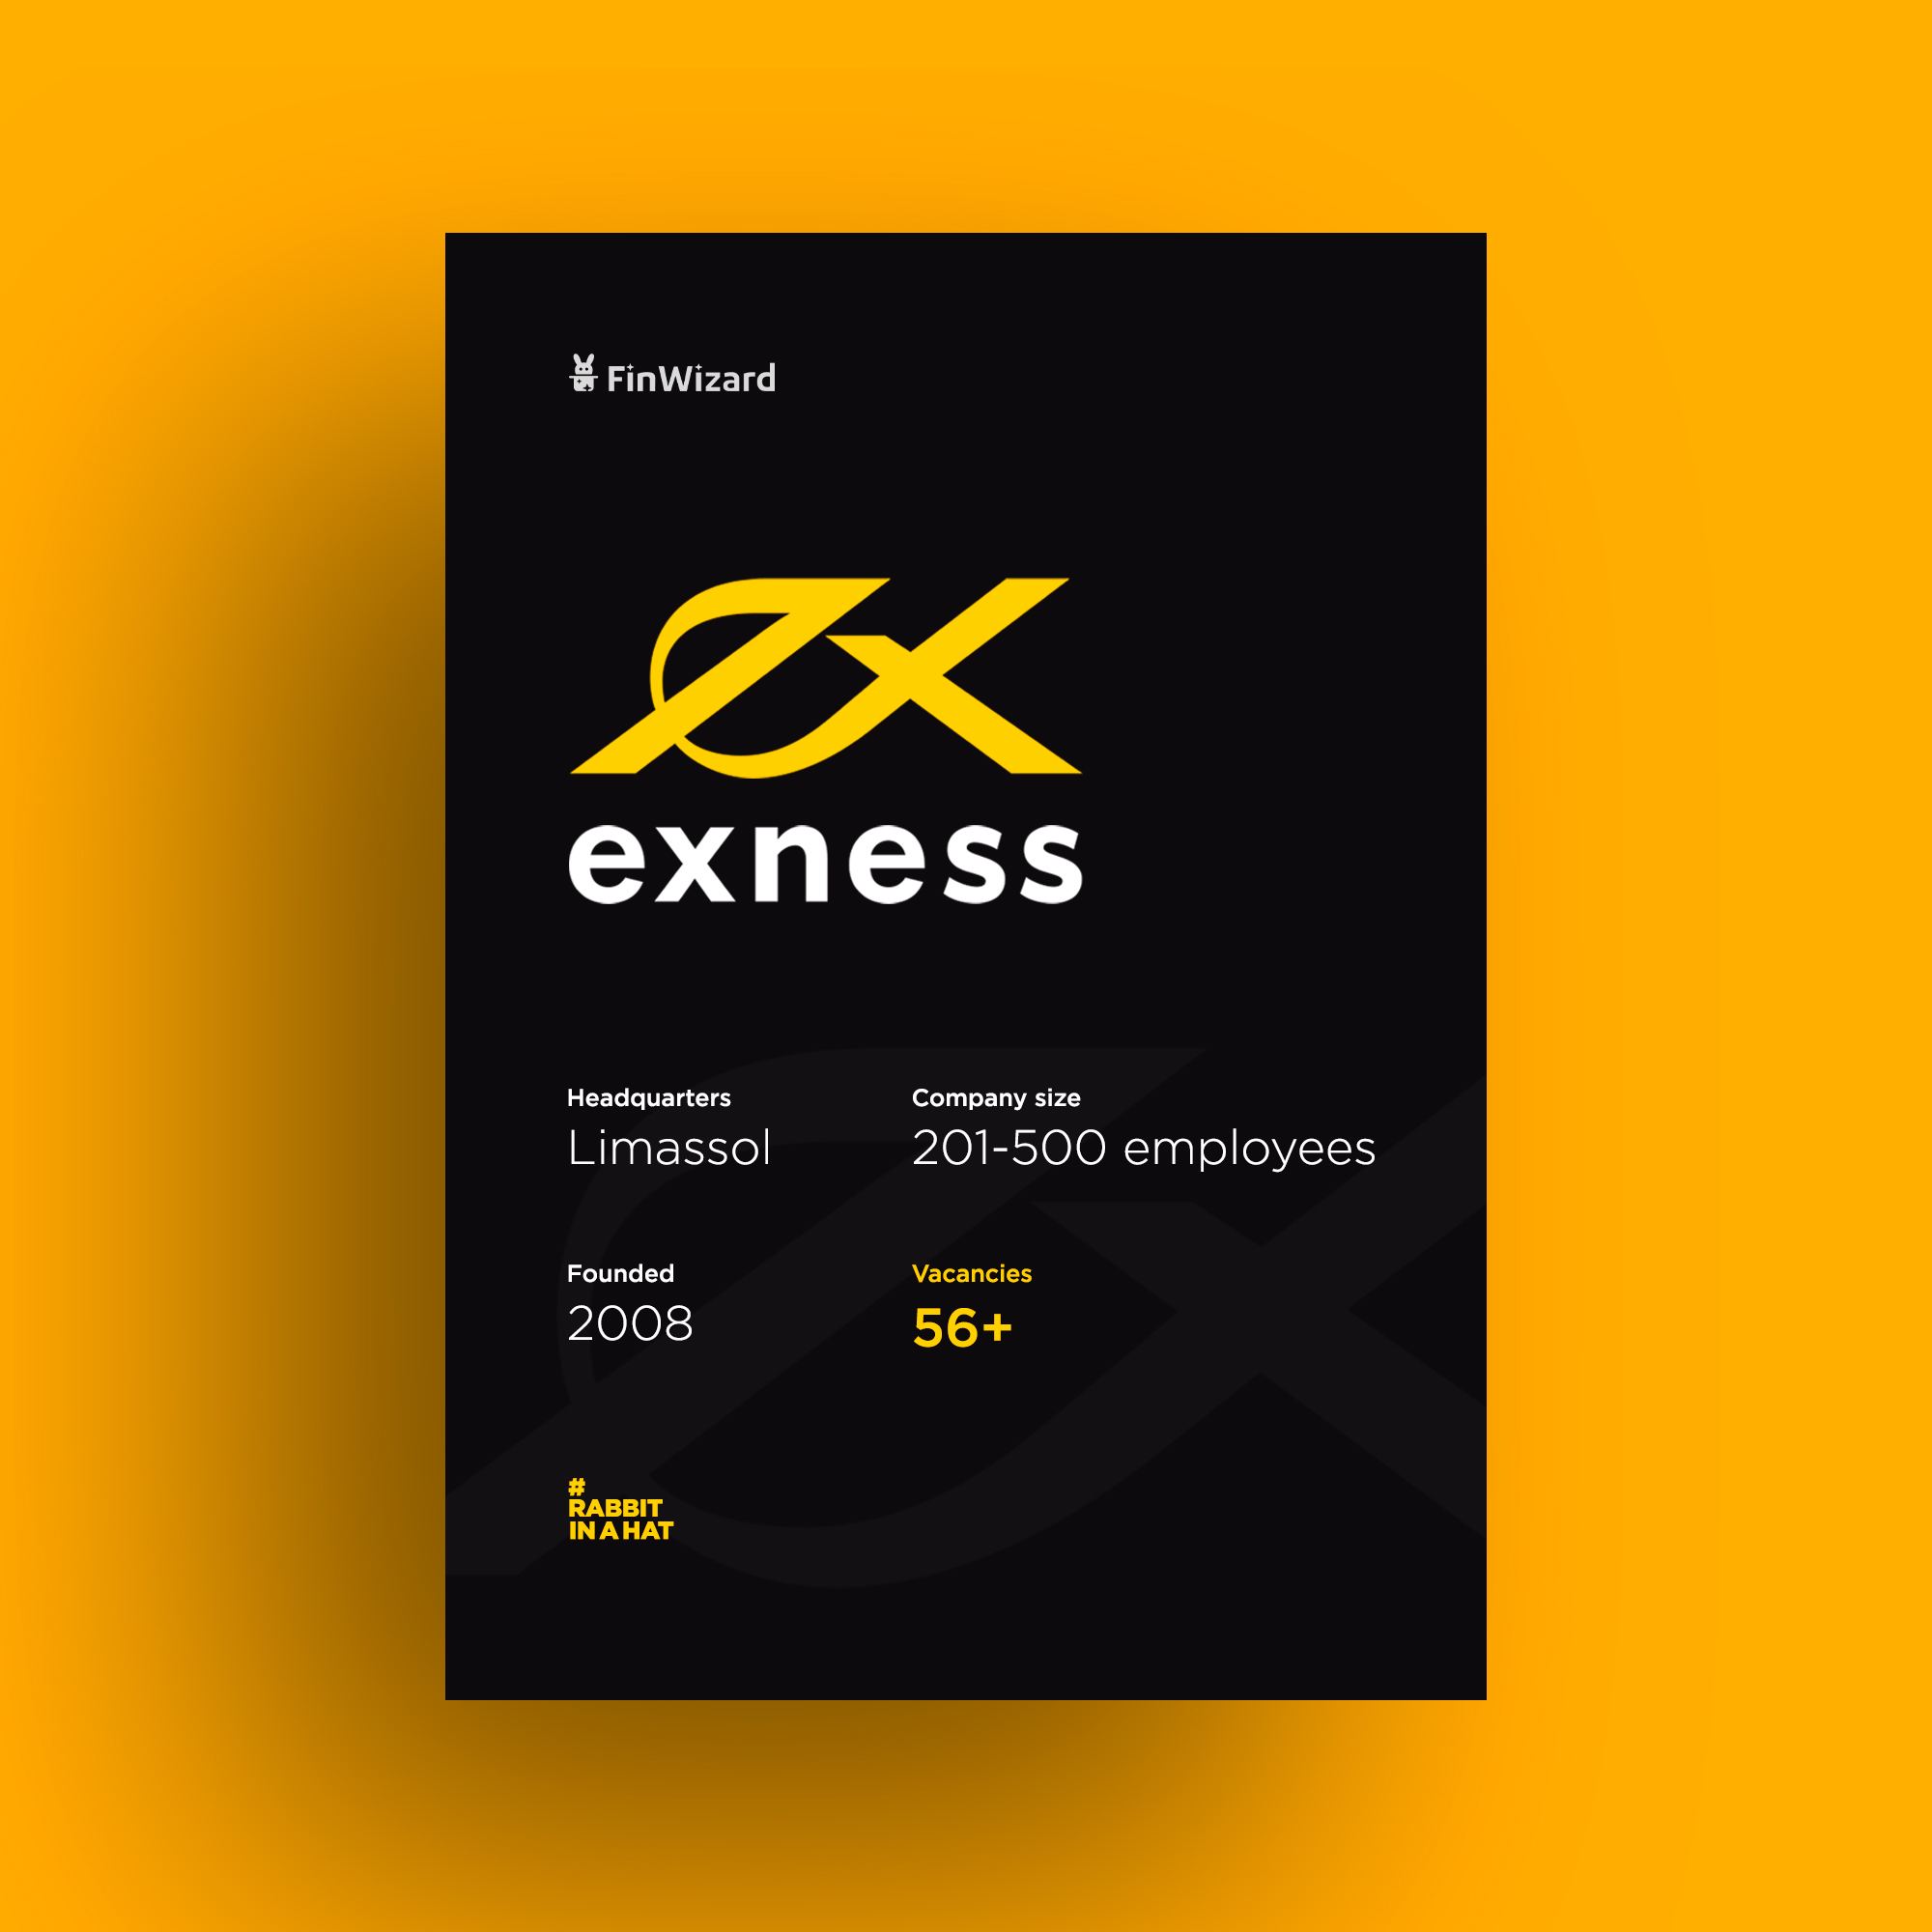 Exness Once, Exness Twice: 3 Reasons Why You Shouldn't Exness The Third Time